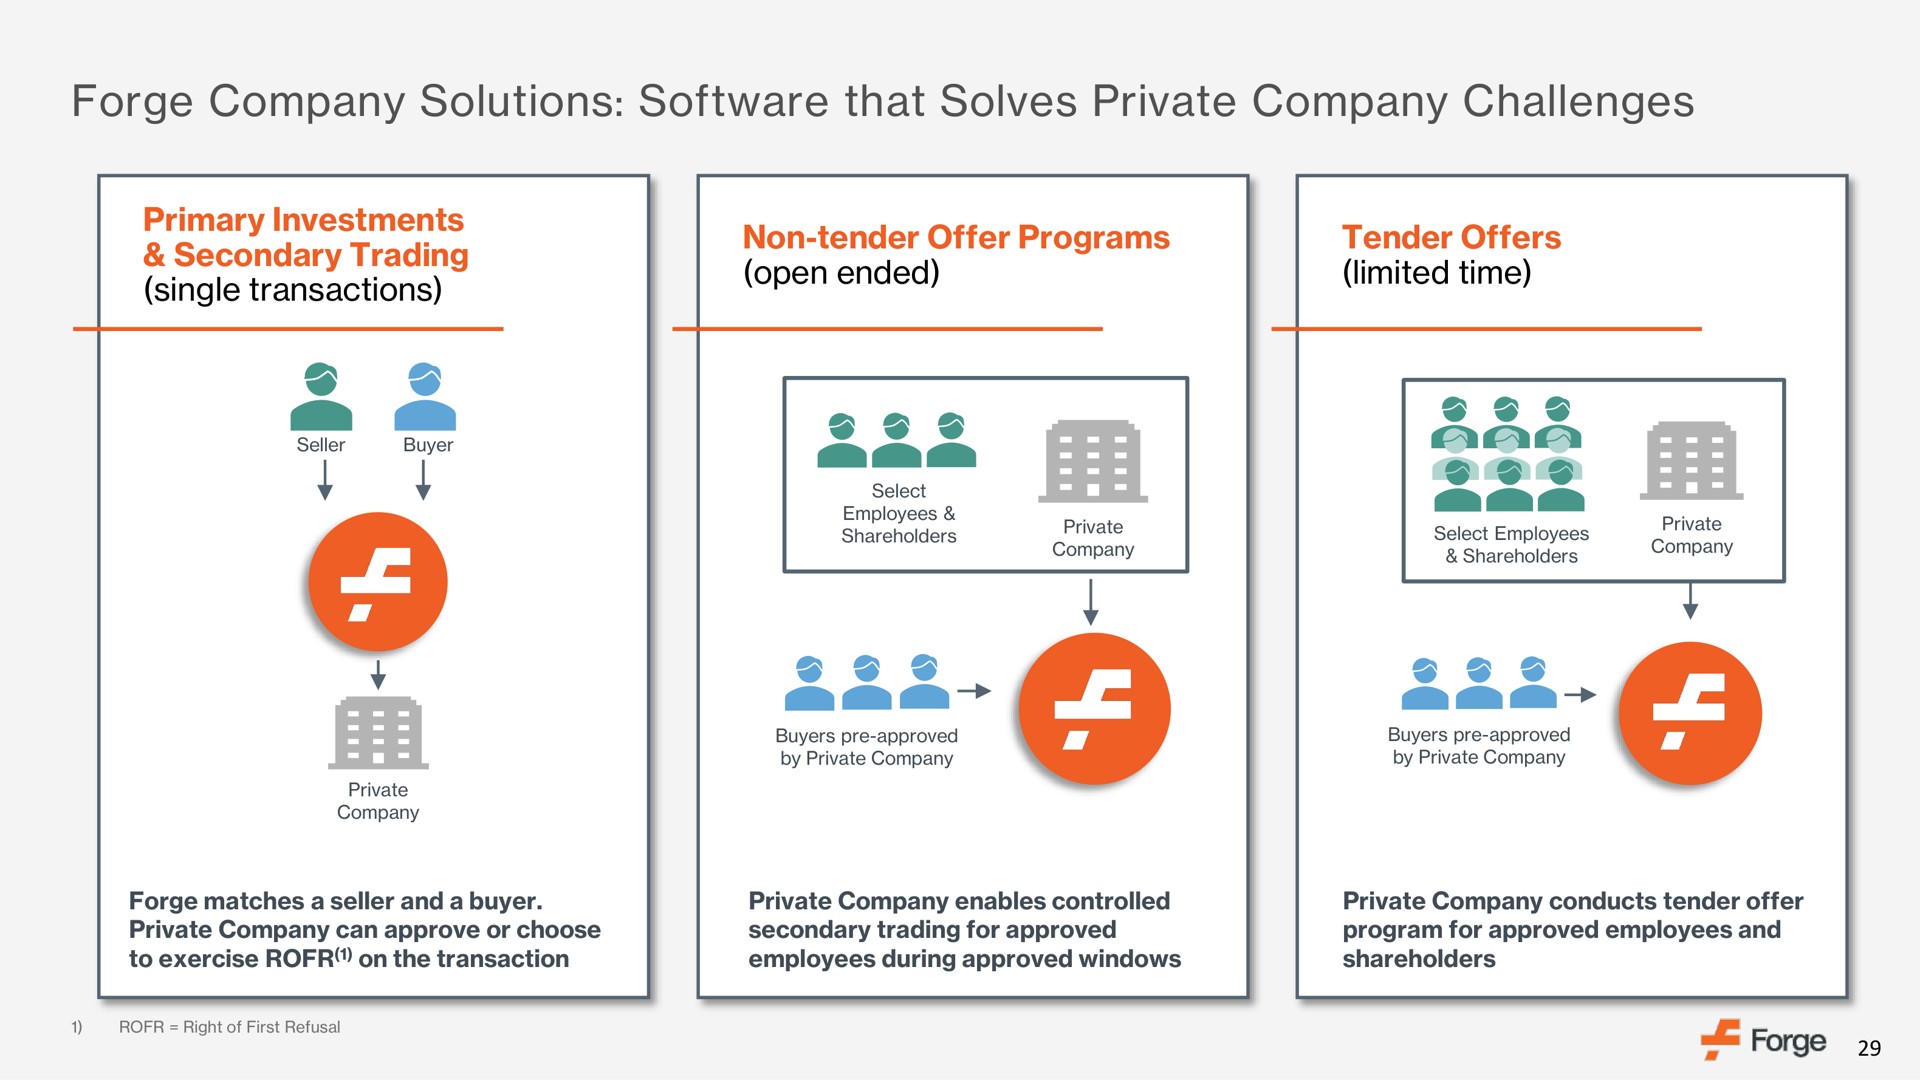 forge company solutions that solves private company challenges | Forge